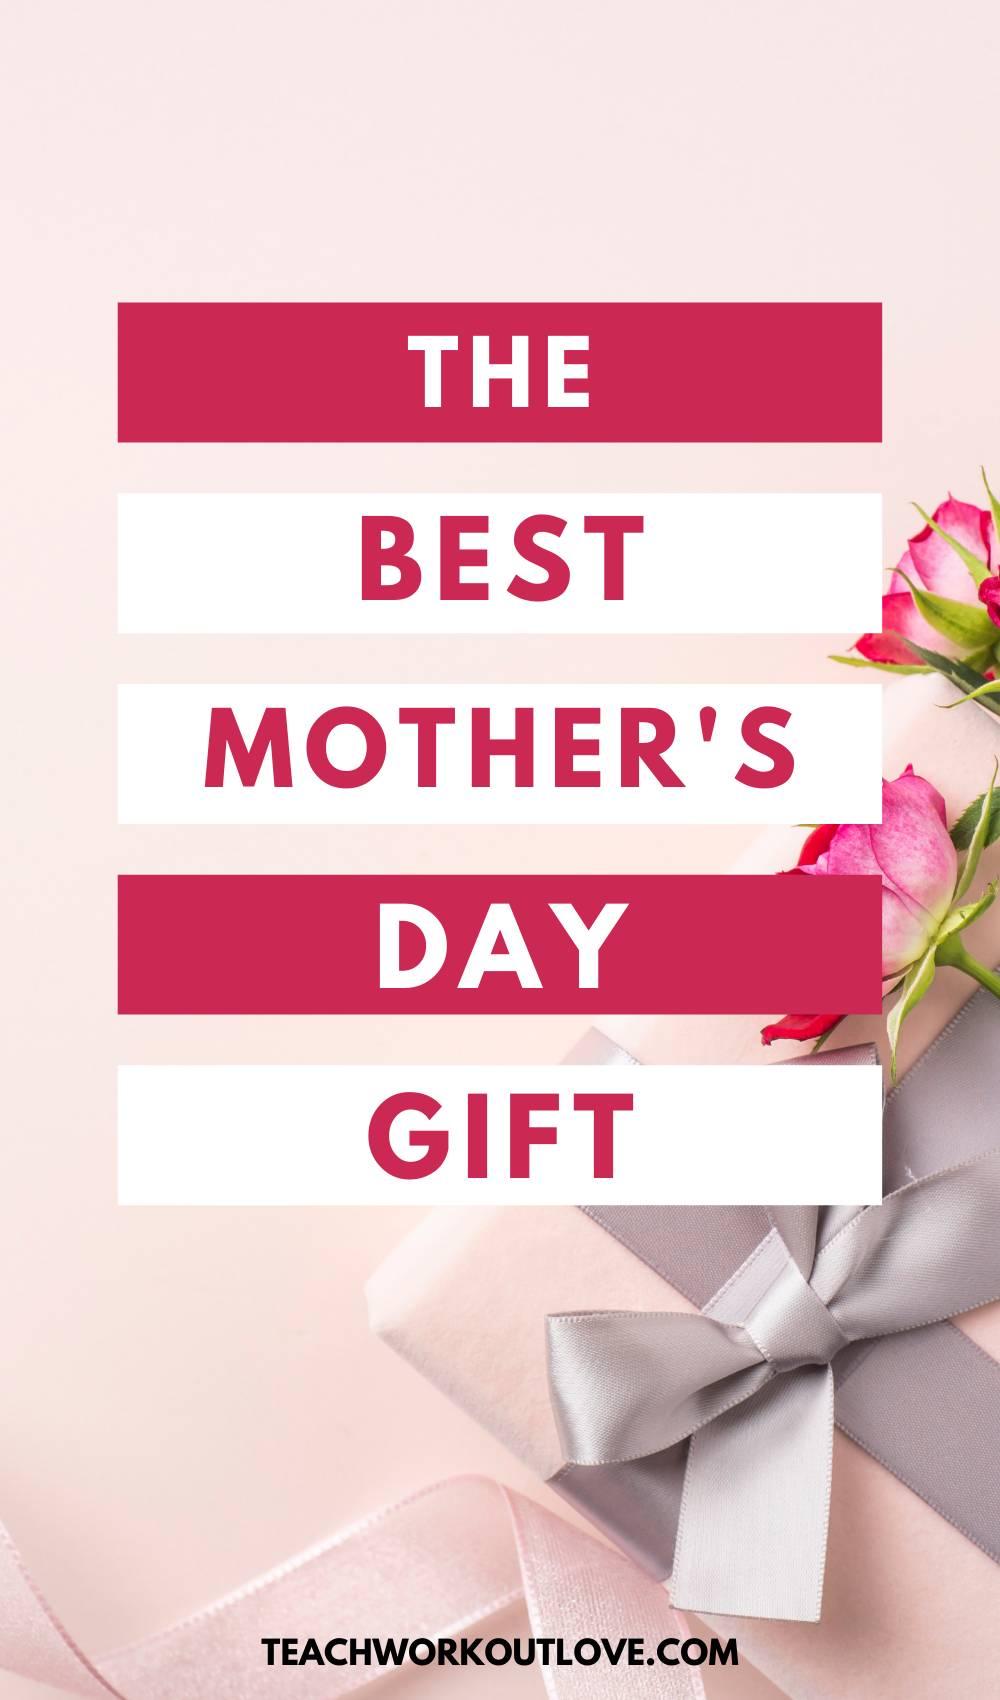 Mother's Day is one of the most important days of the year. We've prepared a list of thoughtful Mother's Day gifts to give to your mom.